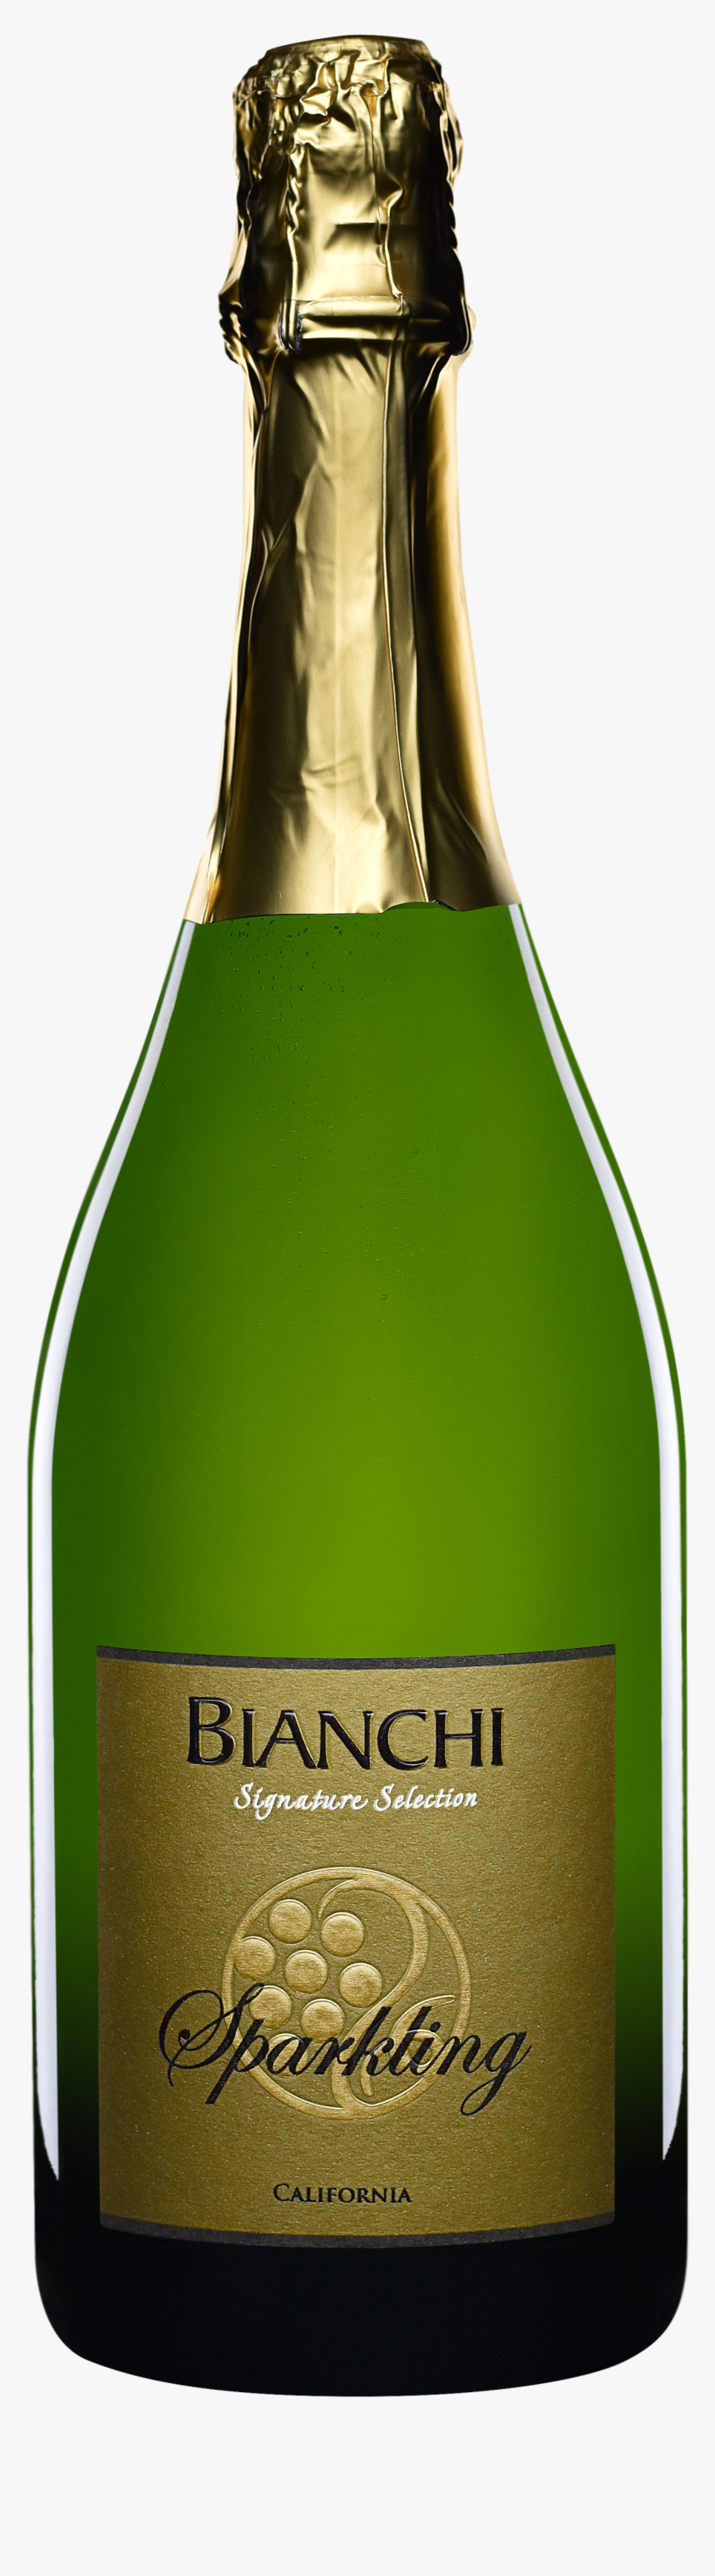 Glass Bottle, HD Png Download, Free Download